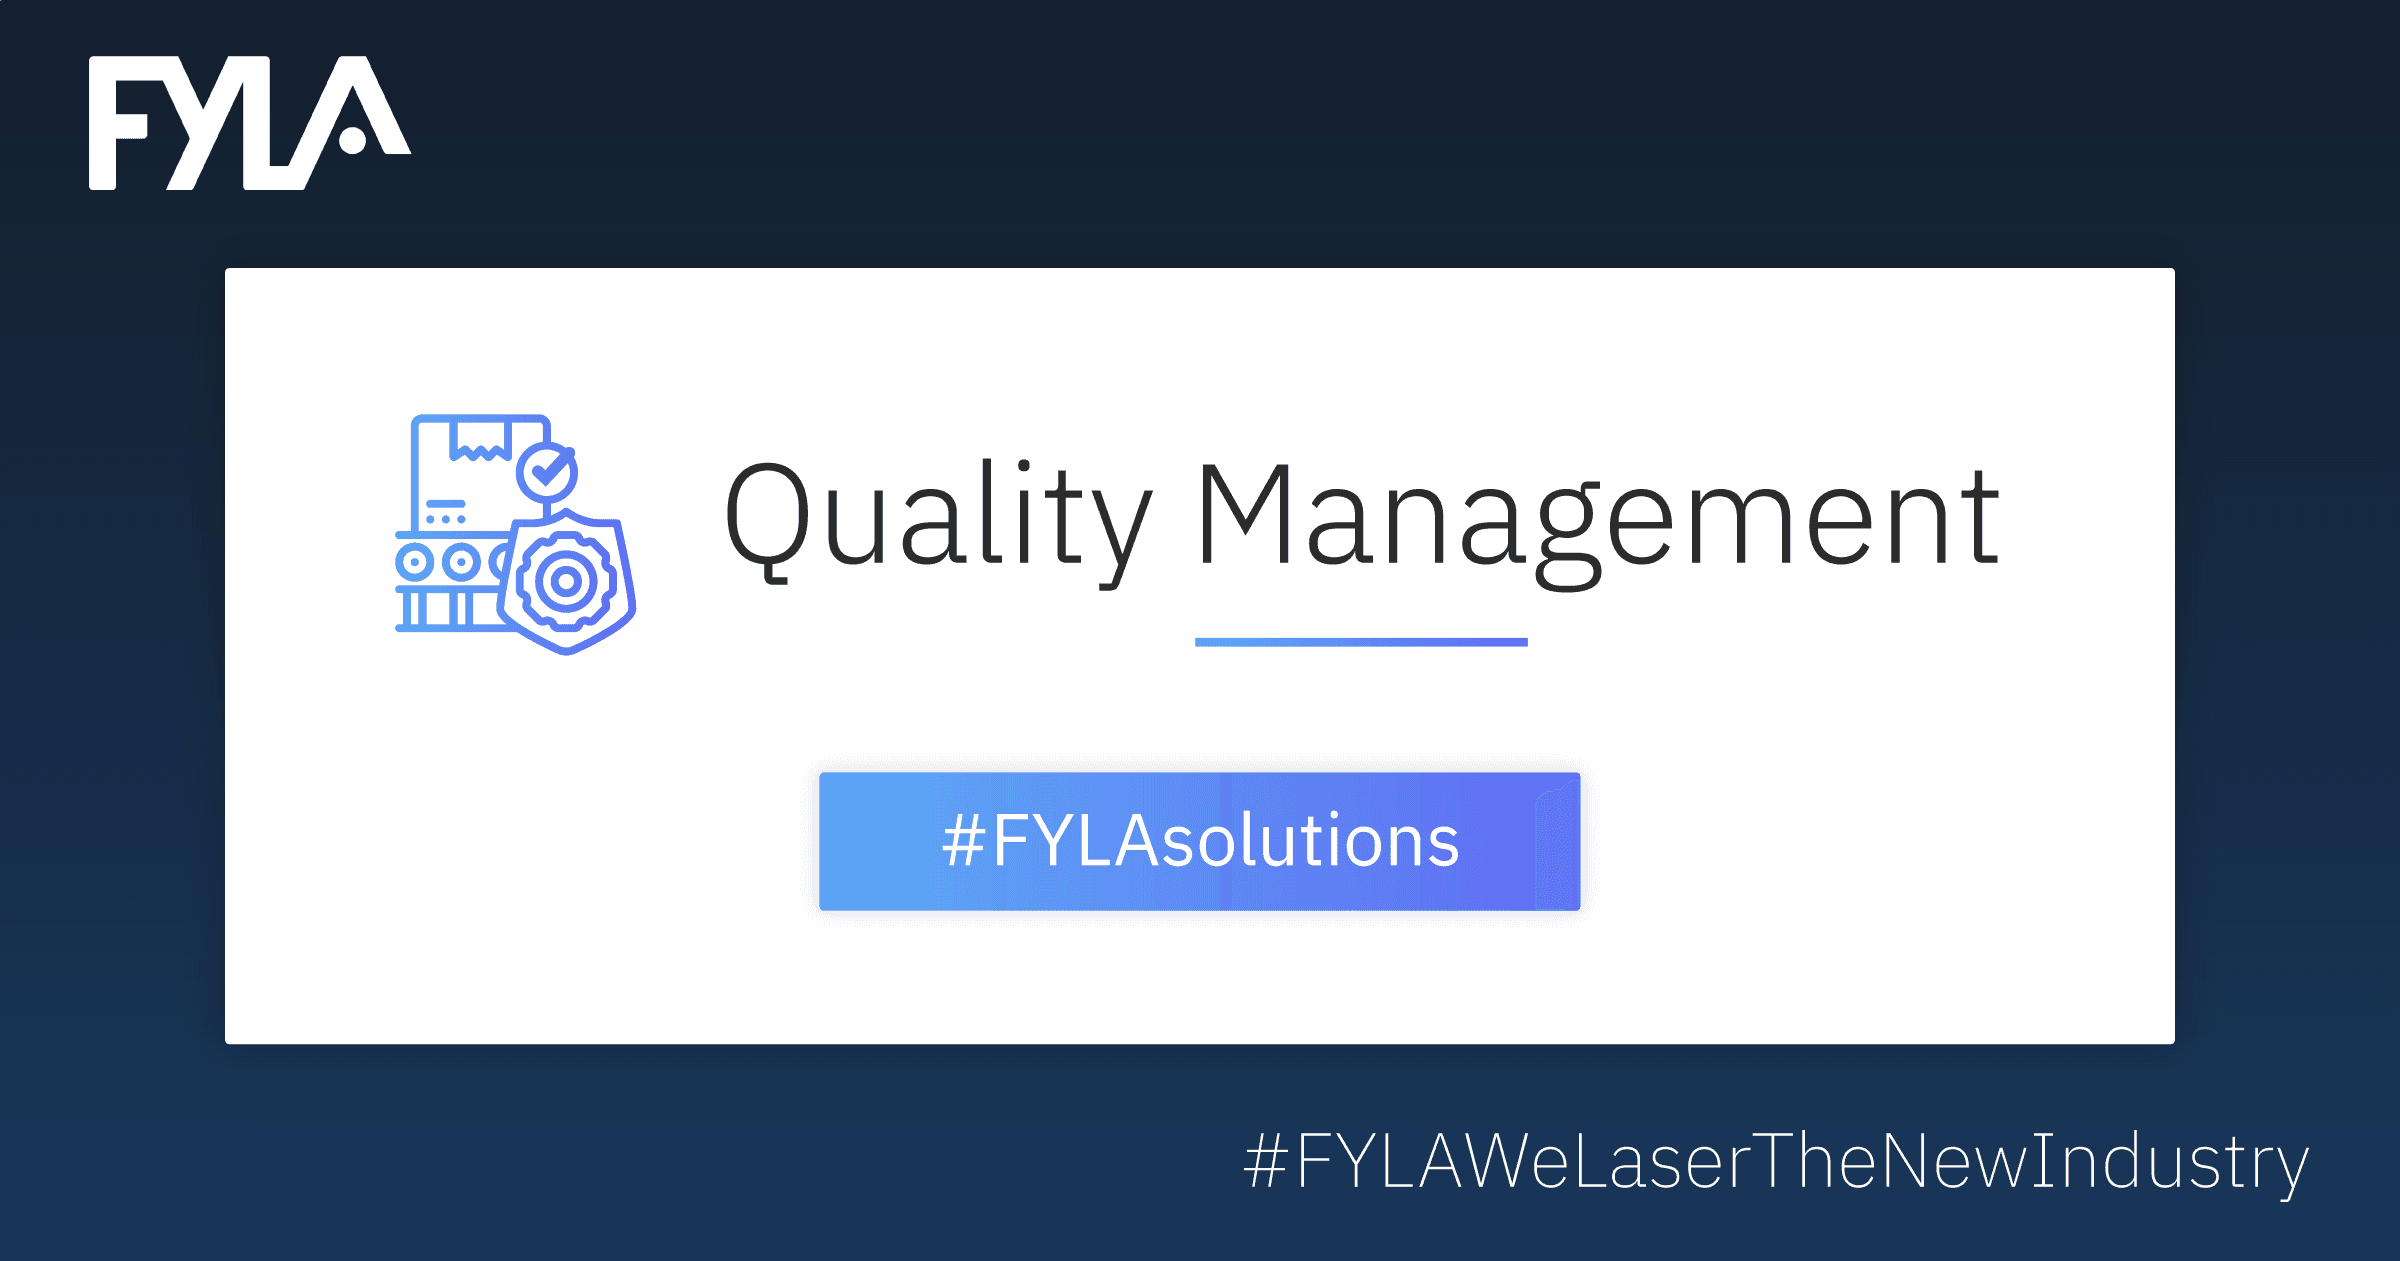 Product FYLA: Industrial Lasers - Scientific Lasers | Singularity & Quality - How do we achieve the best product quality at FYLA? image